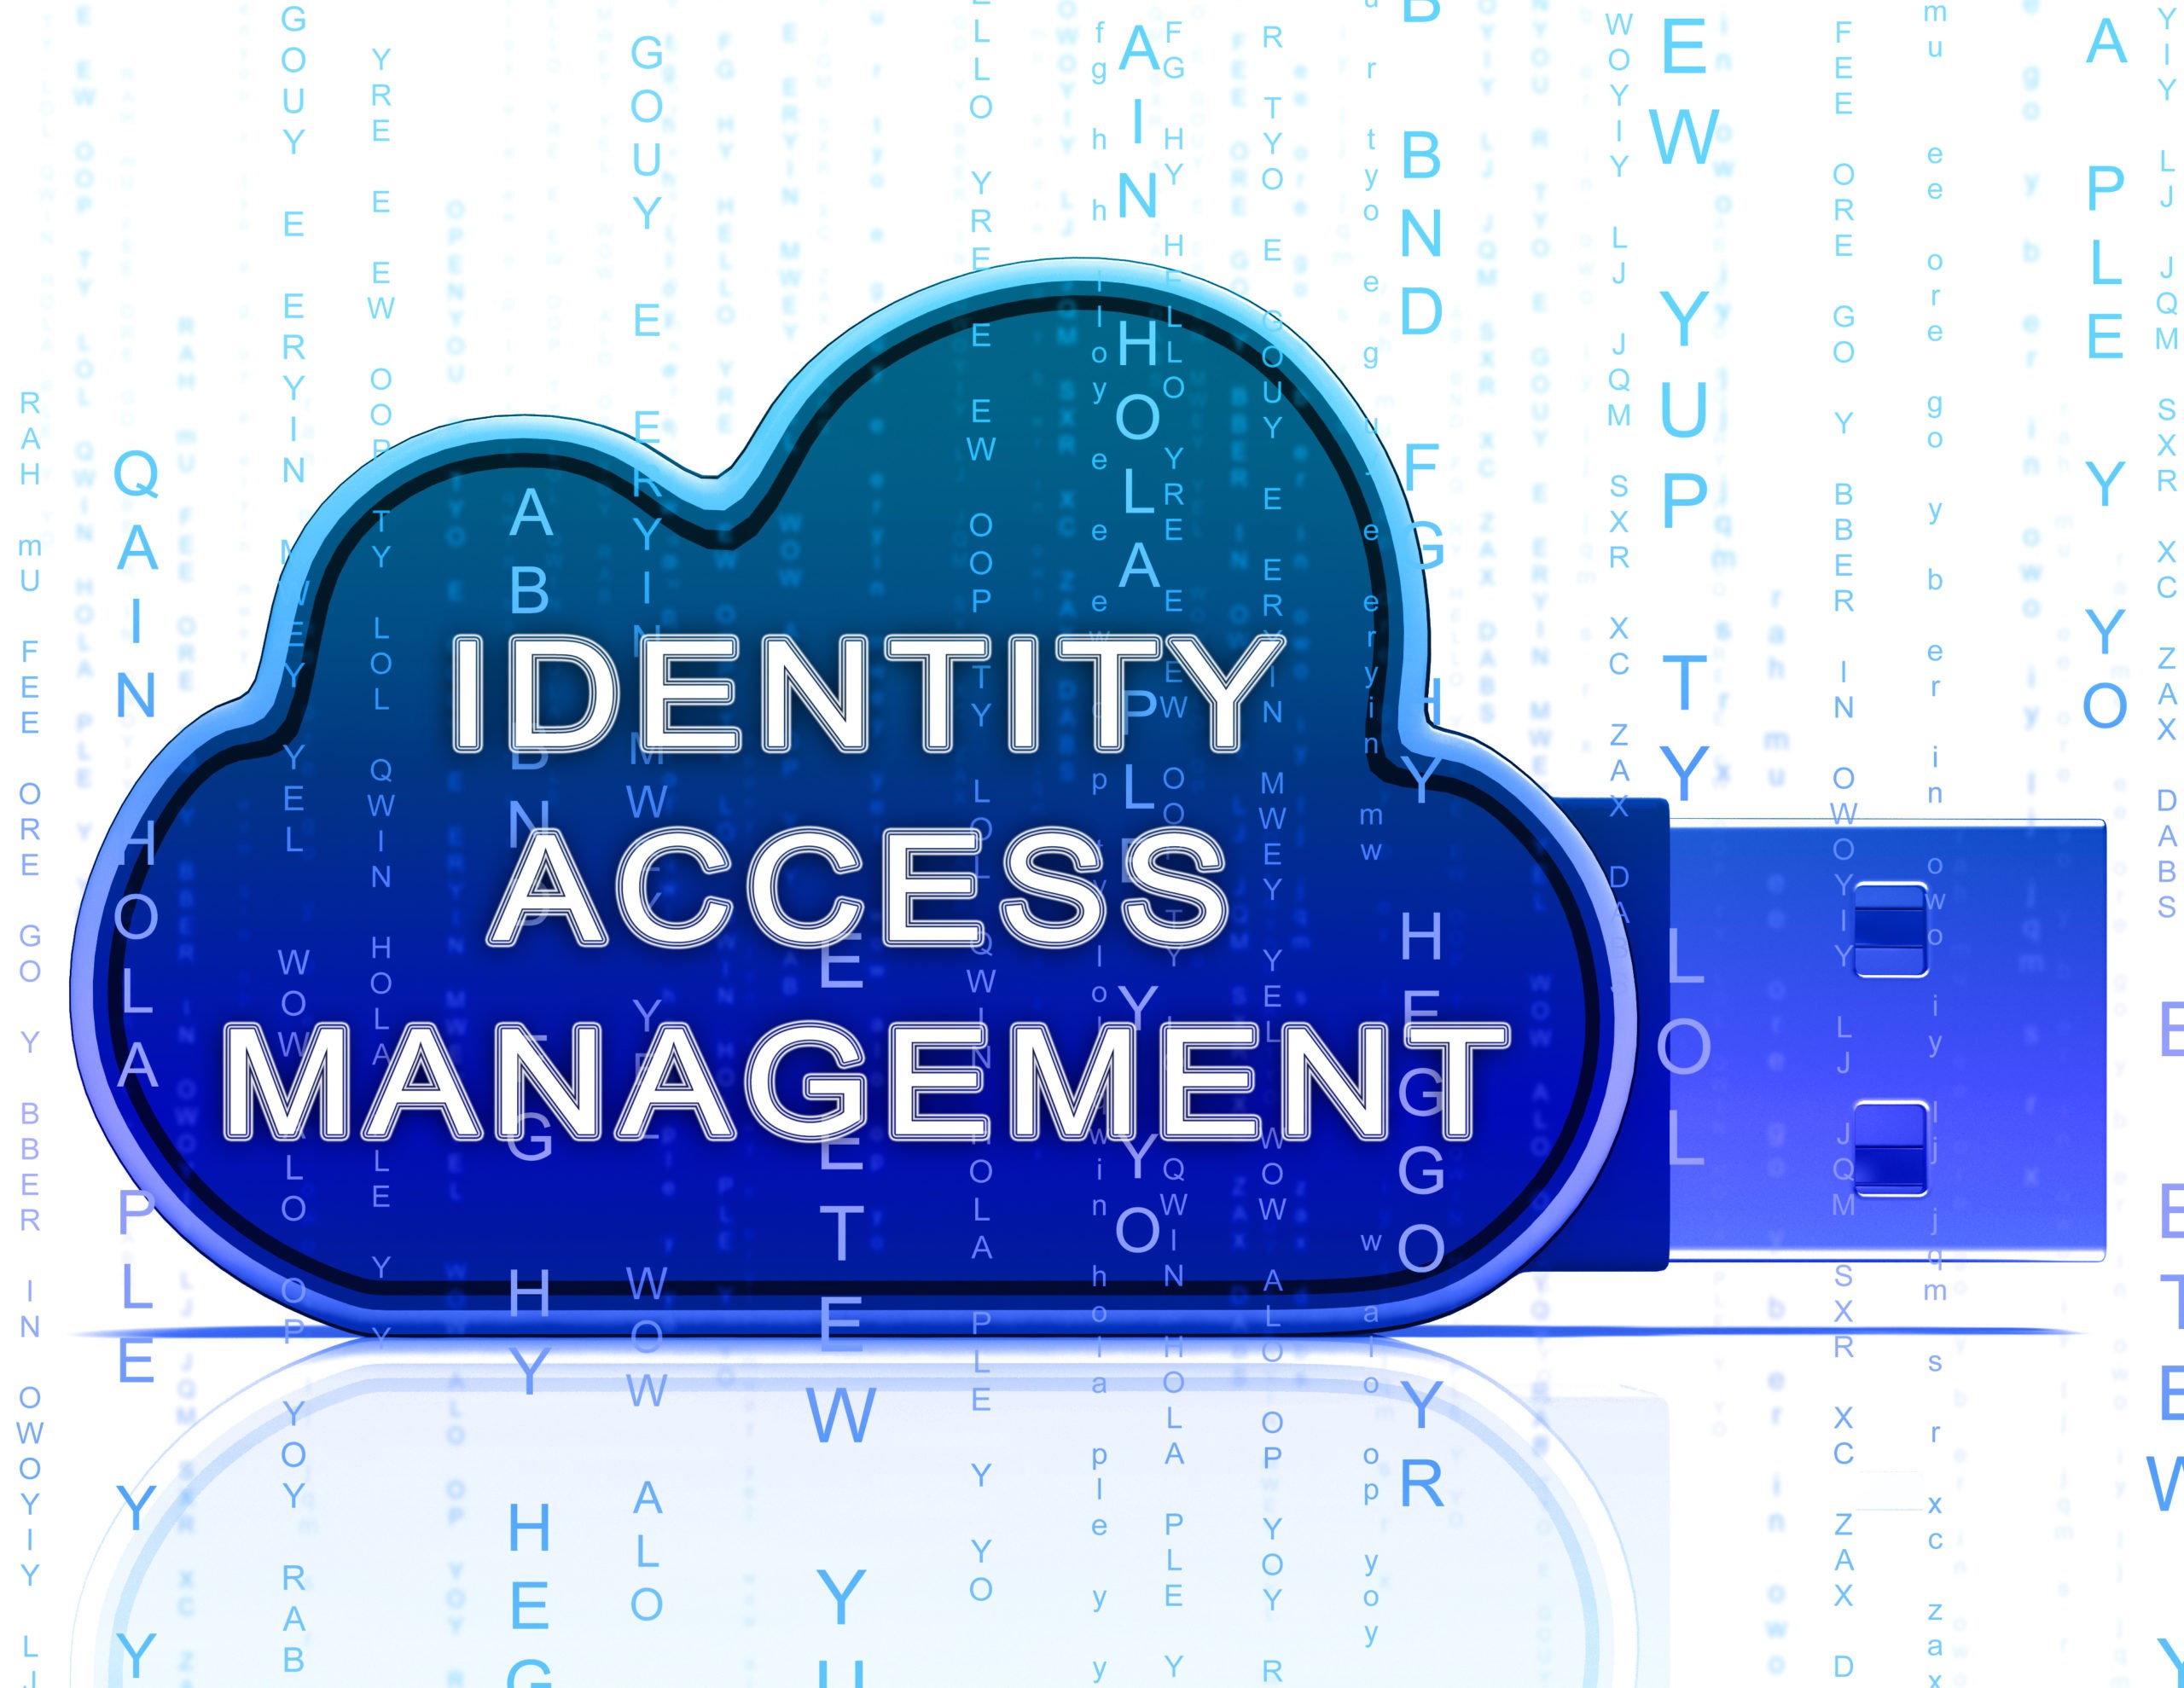 Identity access & management tools for enterprise.